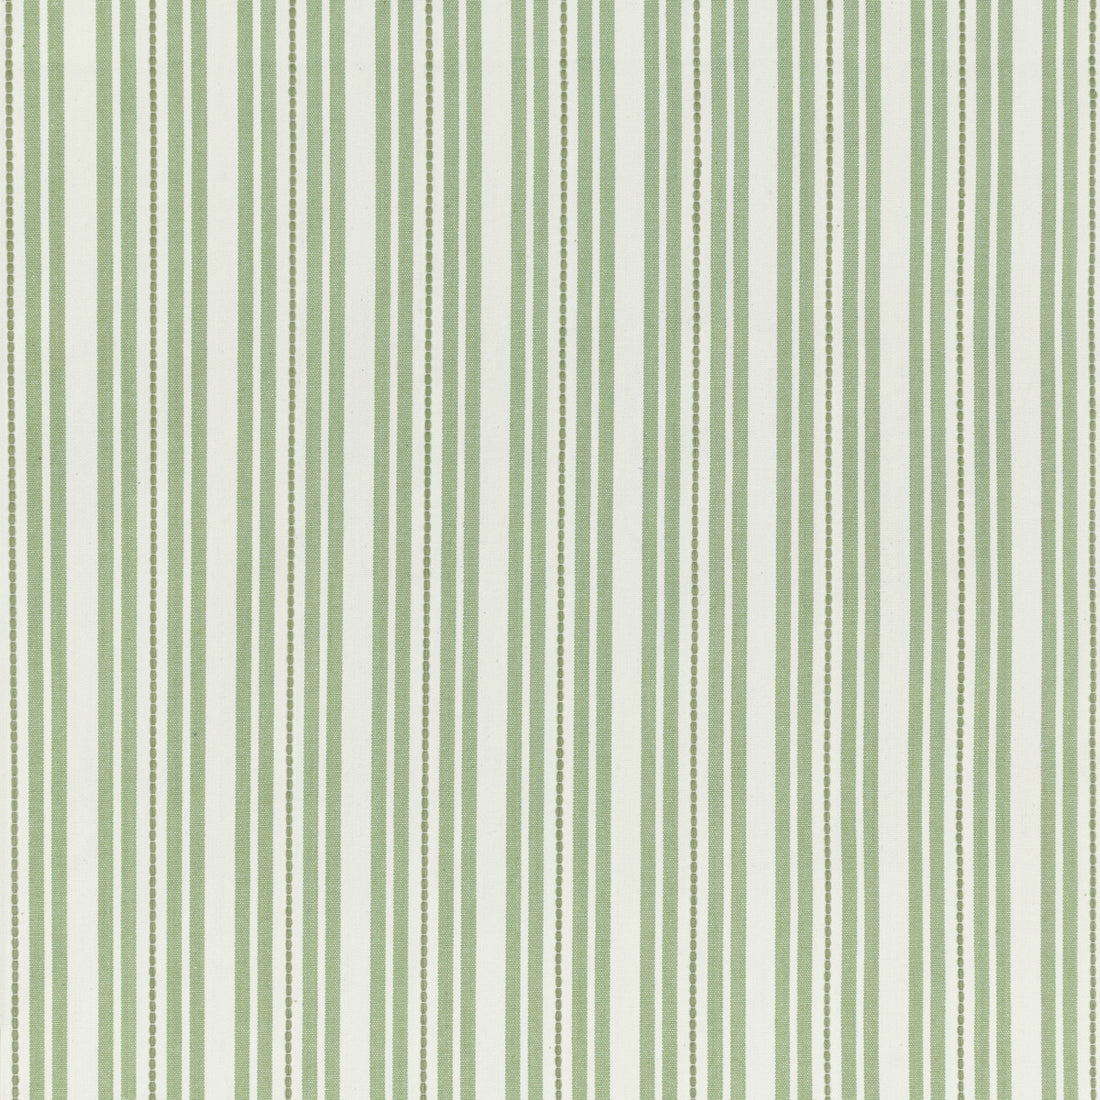 Basics fabric in 36046-30 color - pattern 36046.30.0 - by Kravet Basics in the L&